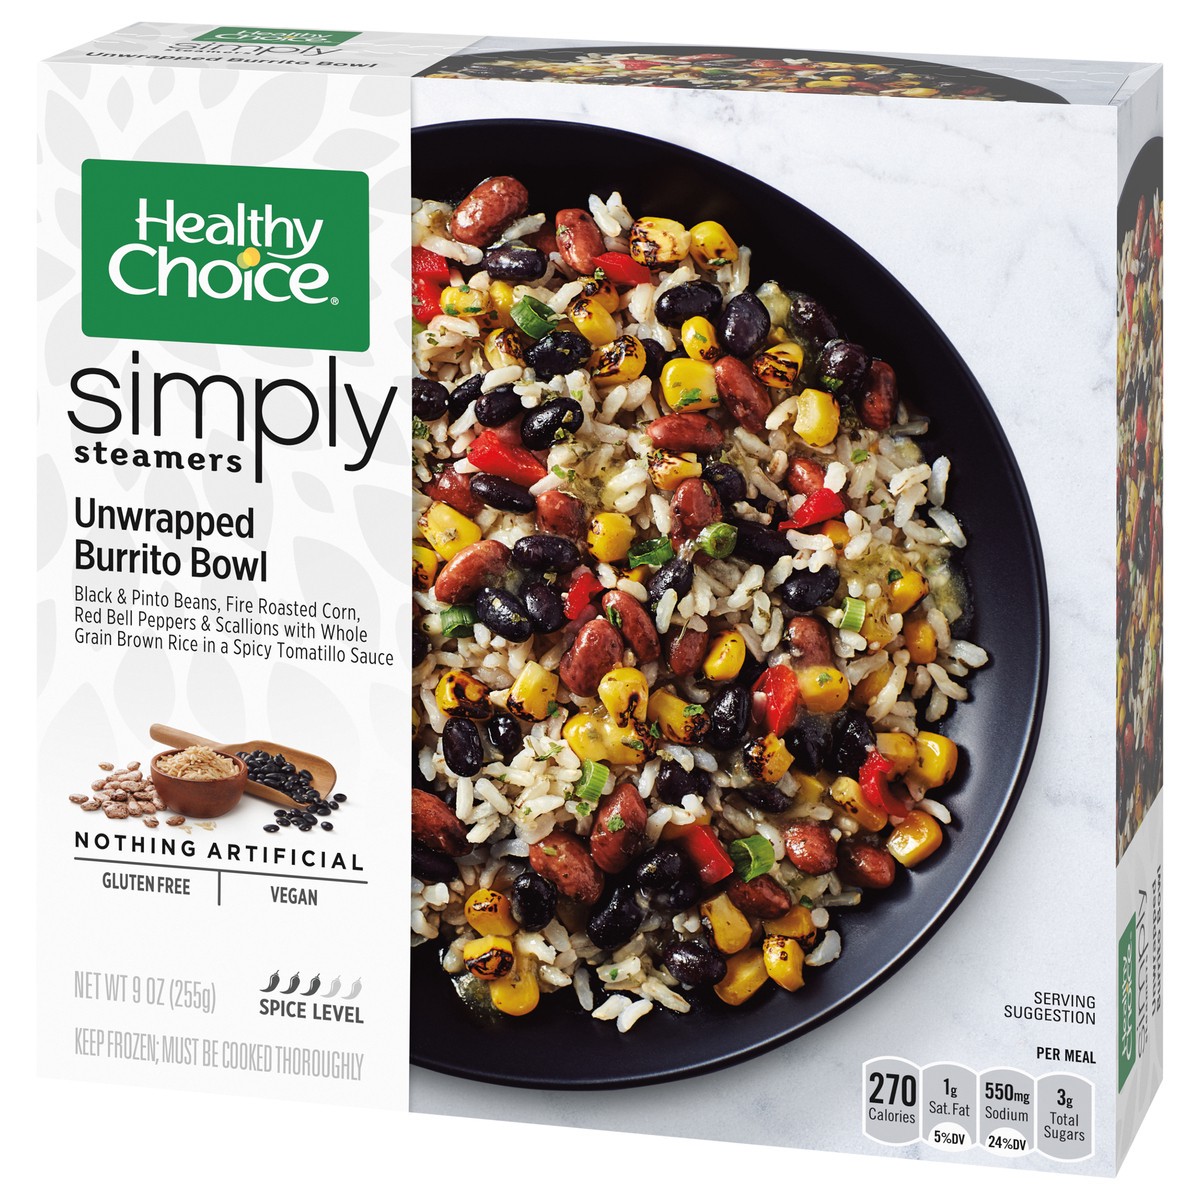 slide 5 of 9, Healthy Choice Simply Steamers Unwrapped Burrito Bowl Frozen Meal, 9 oz., 9 oz